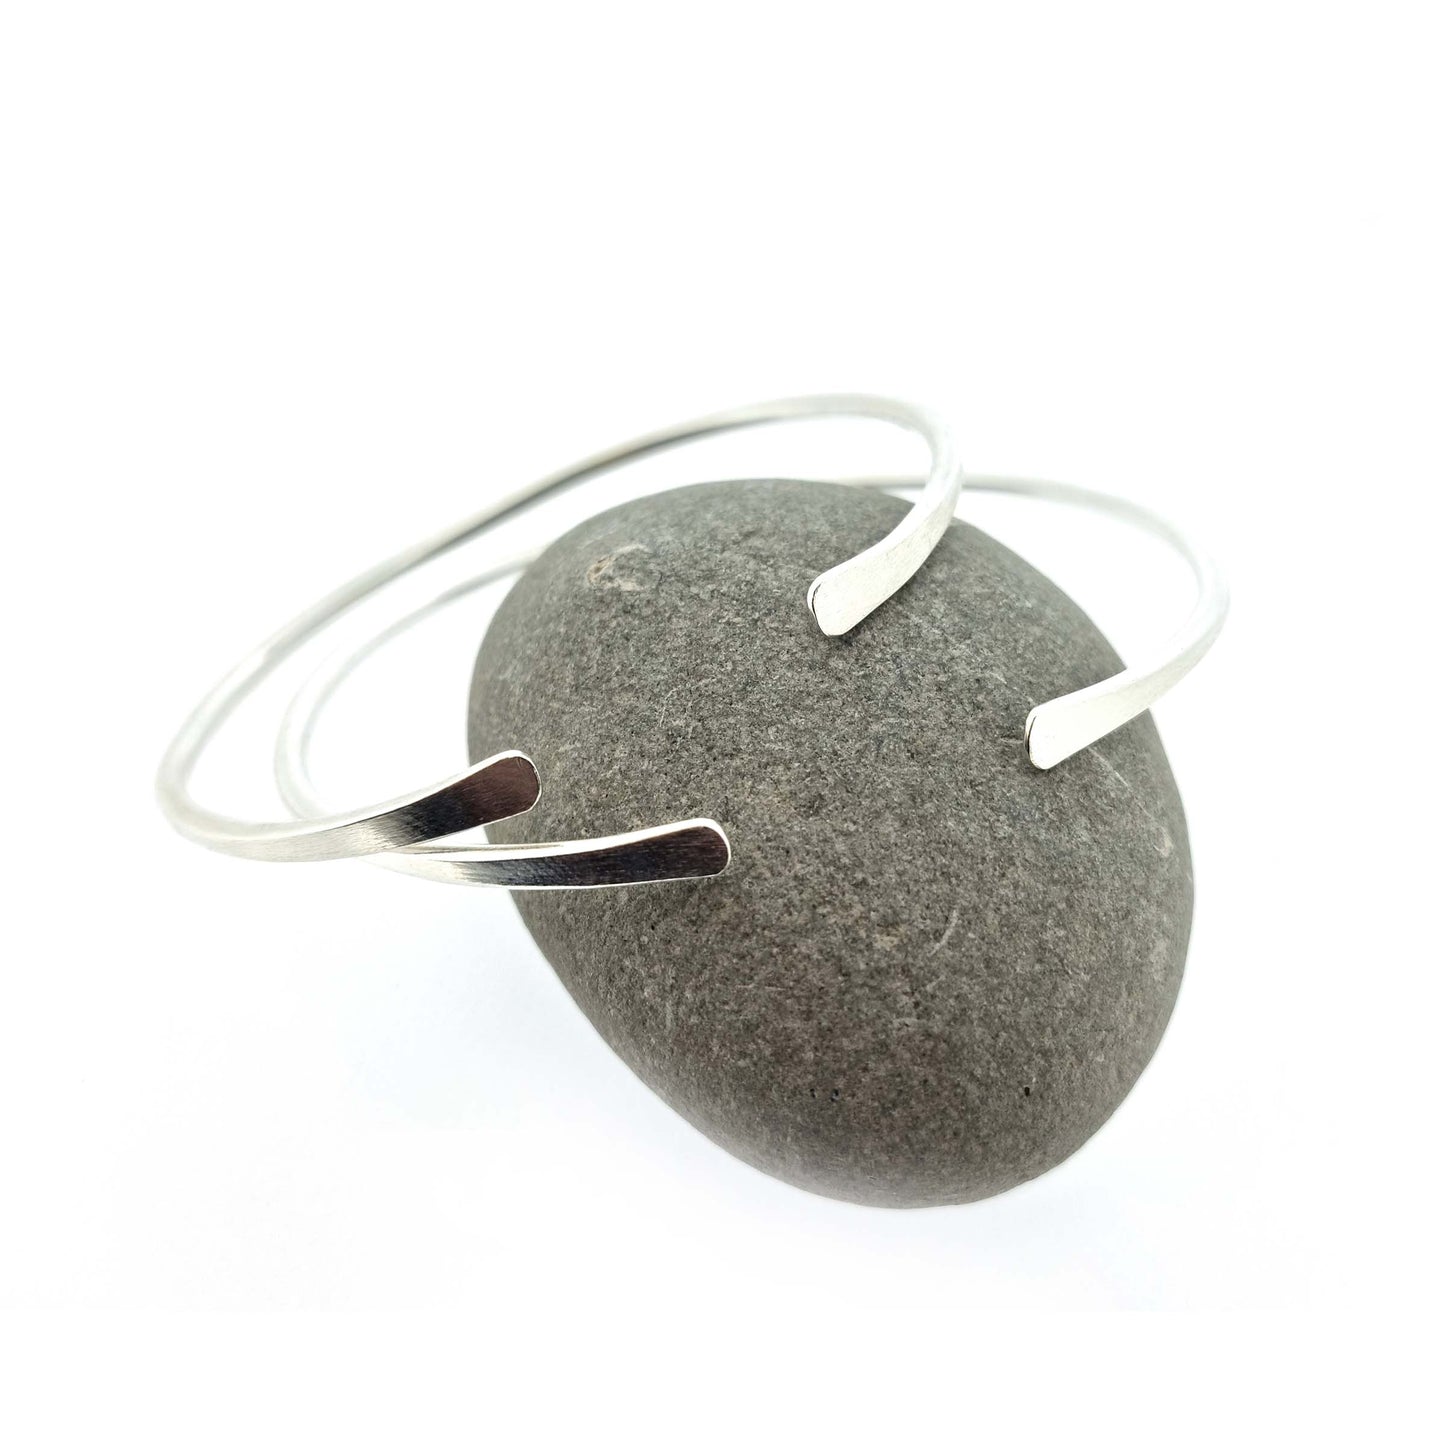 2 silver open torque bangles with flattened ends. Pictured on a pebble.